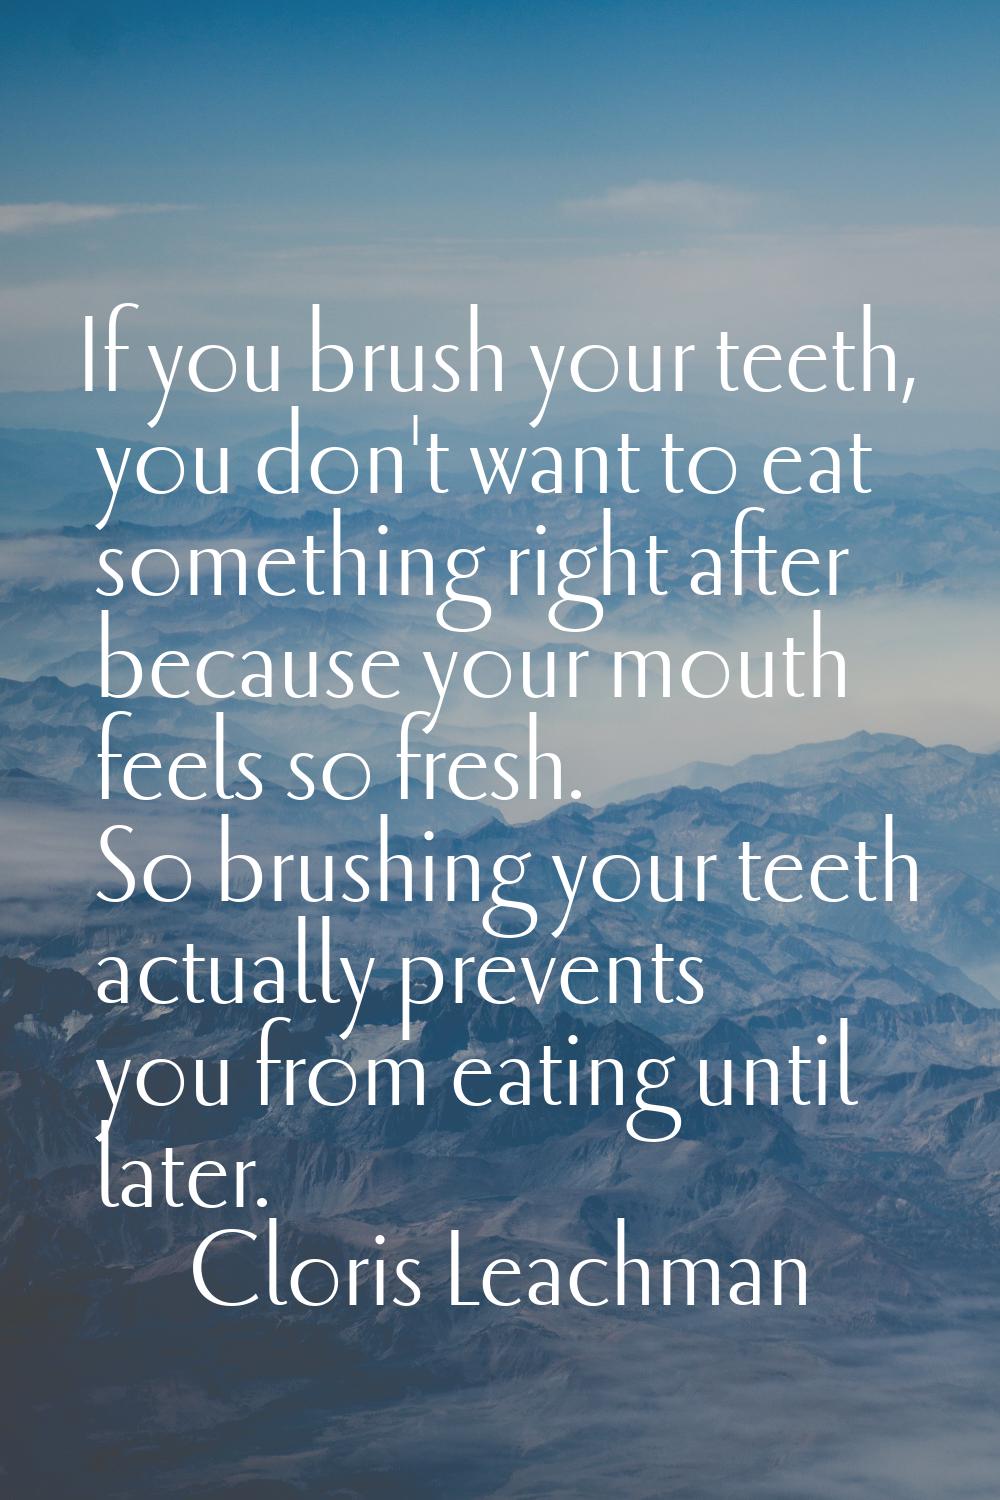 If you brush your teeth, you don't want to eat something right after because your mouth feels so fr